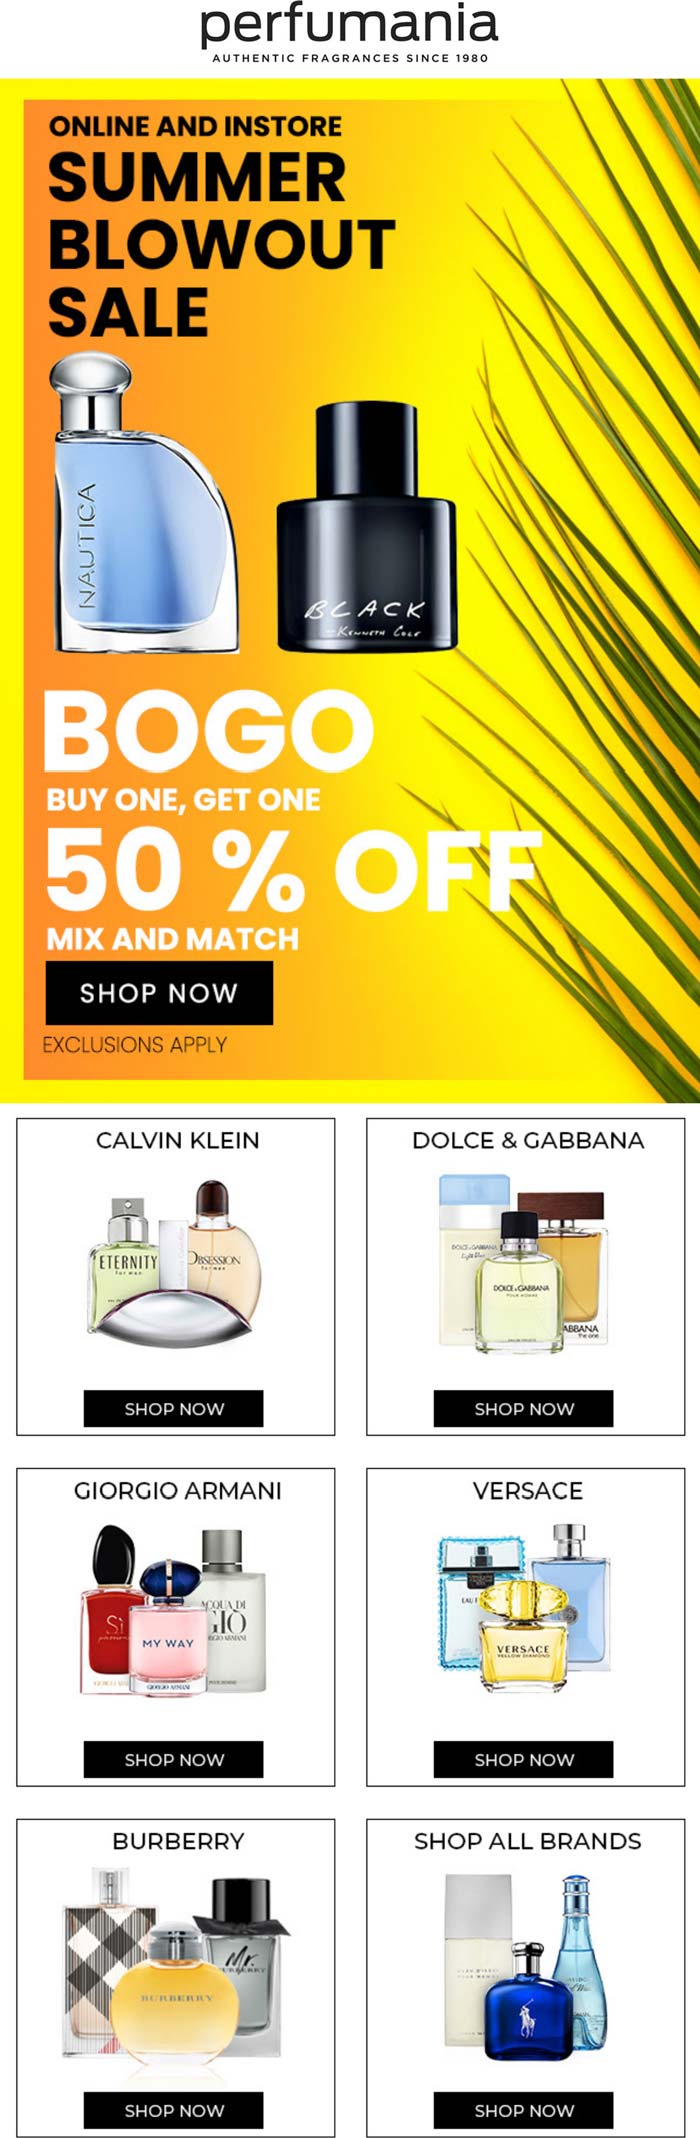 Perfumania stores Coupon  Second fragrance 50% off at Perfumania, ditto online #perfumania 